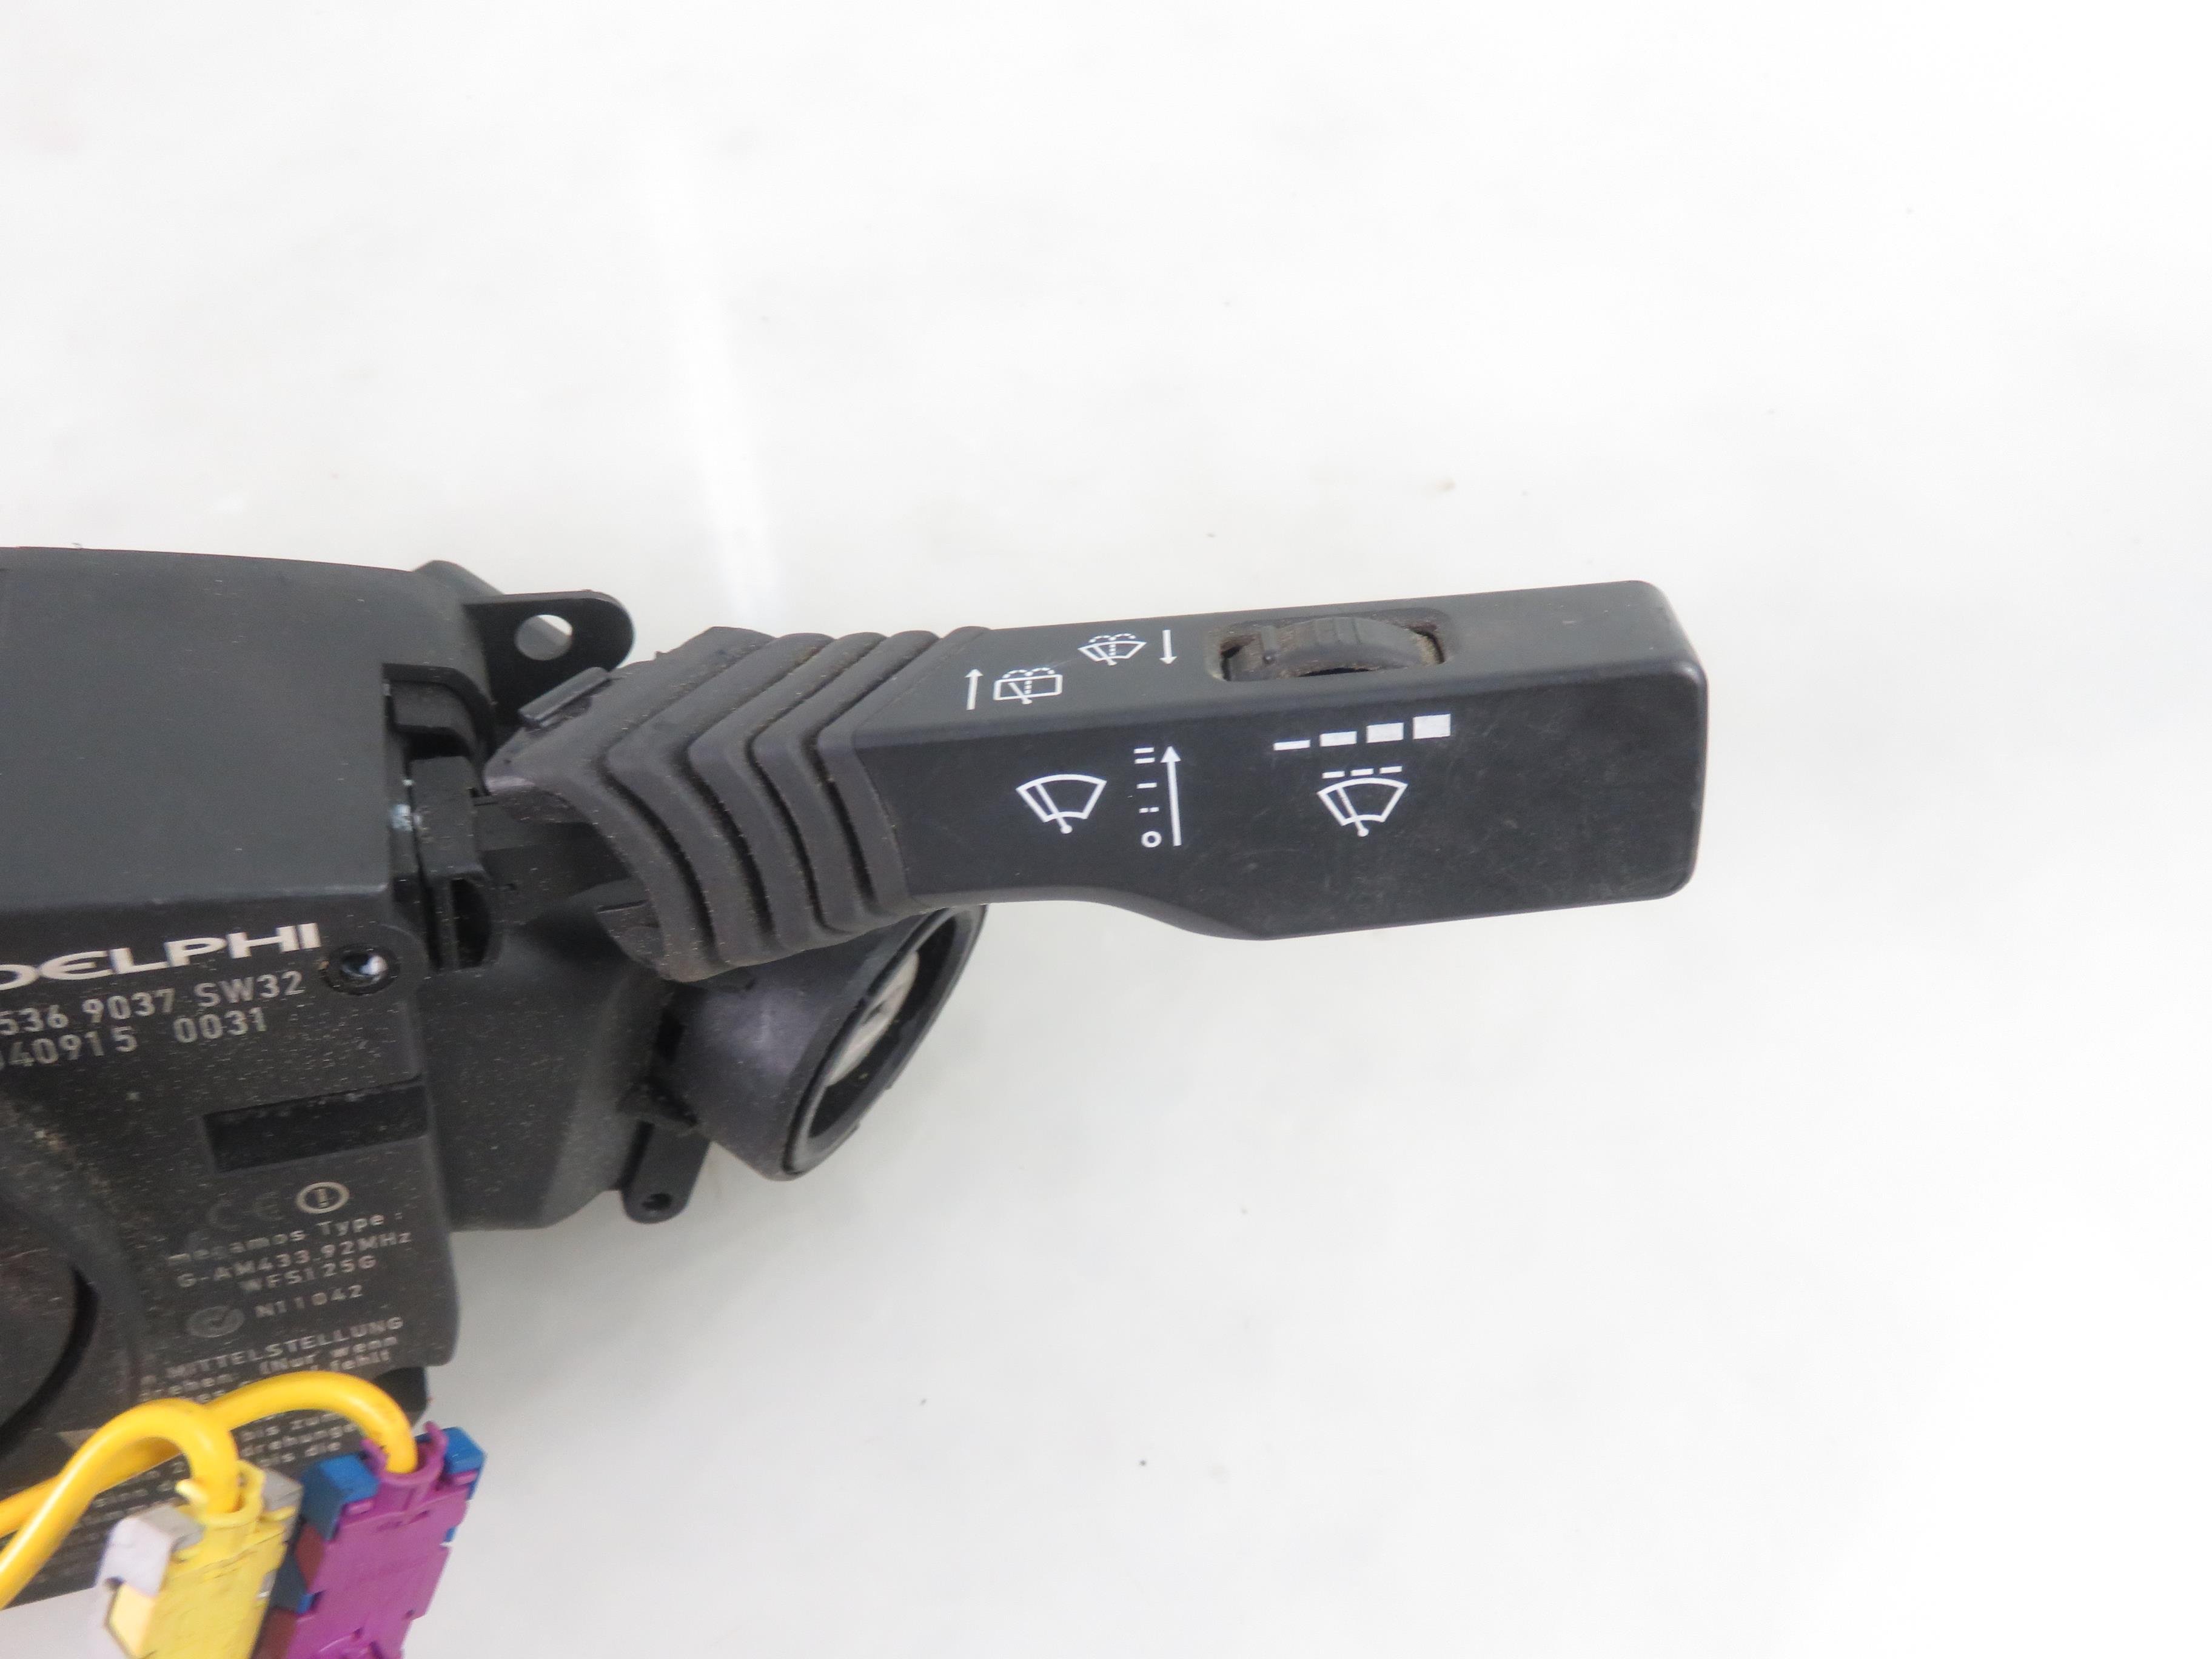 OPEL Vectra C (2002-2005) Switches 13162134DL 25191865